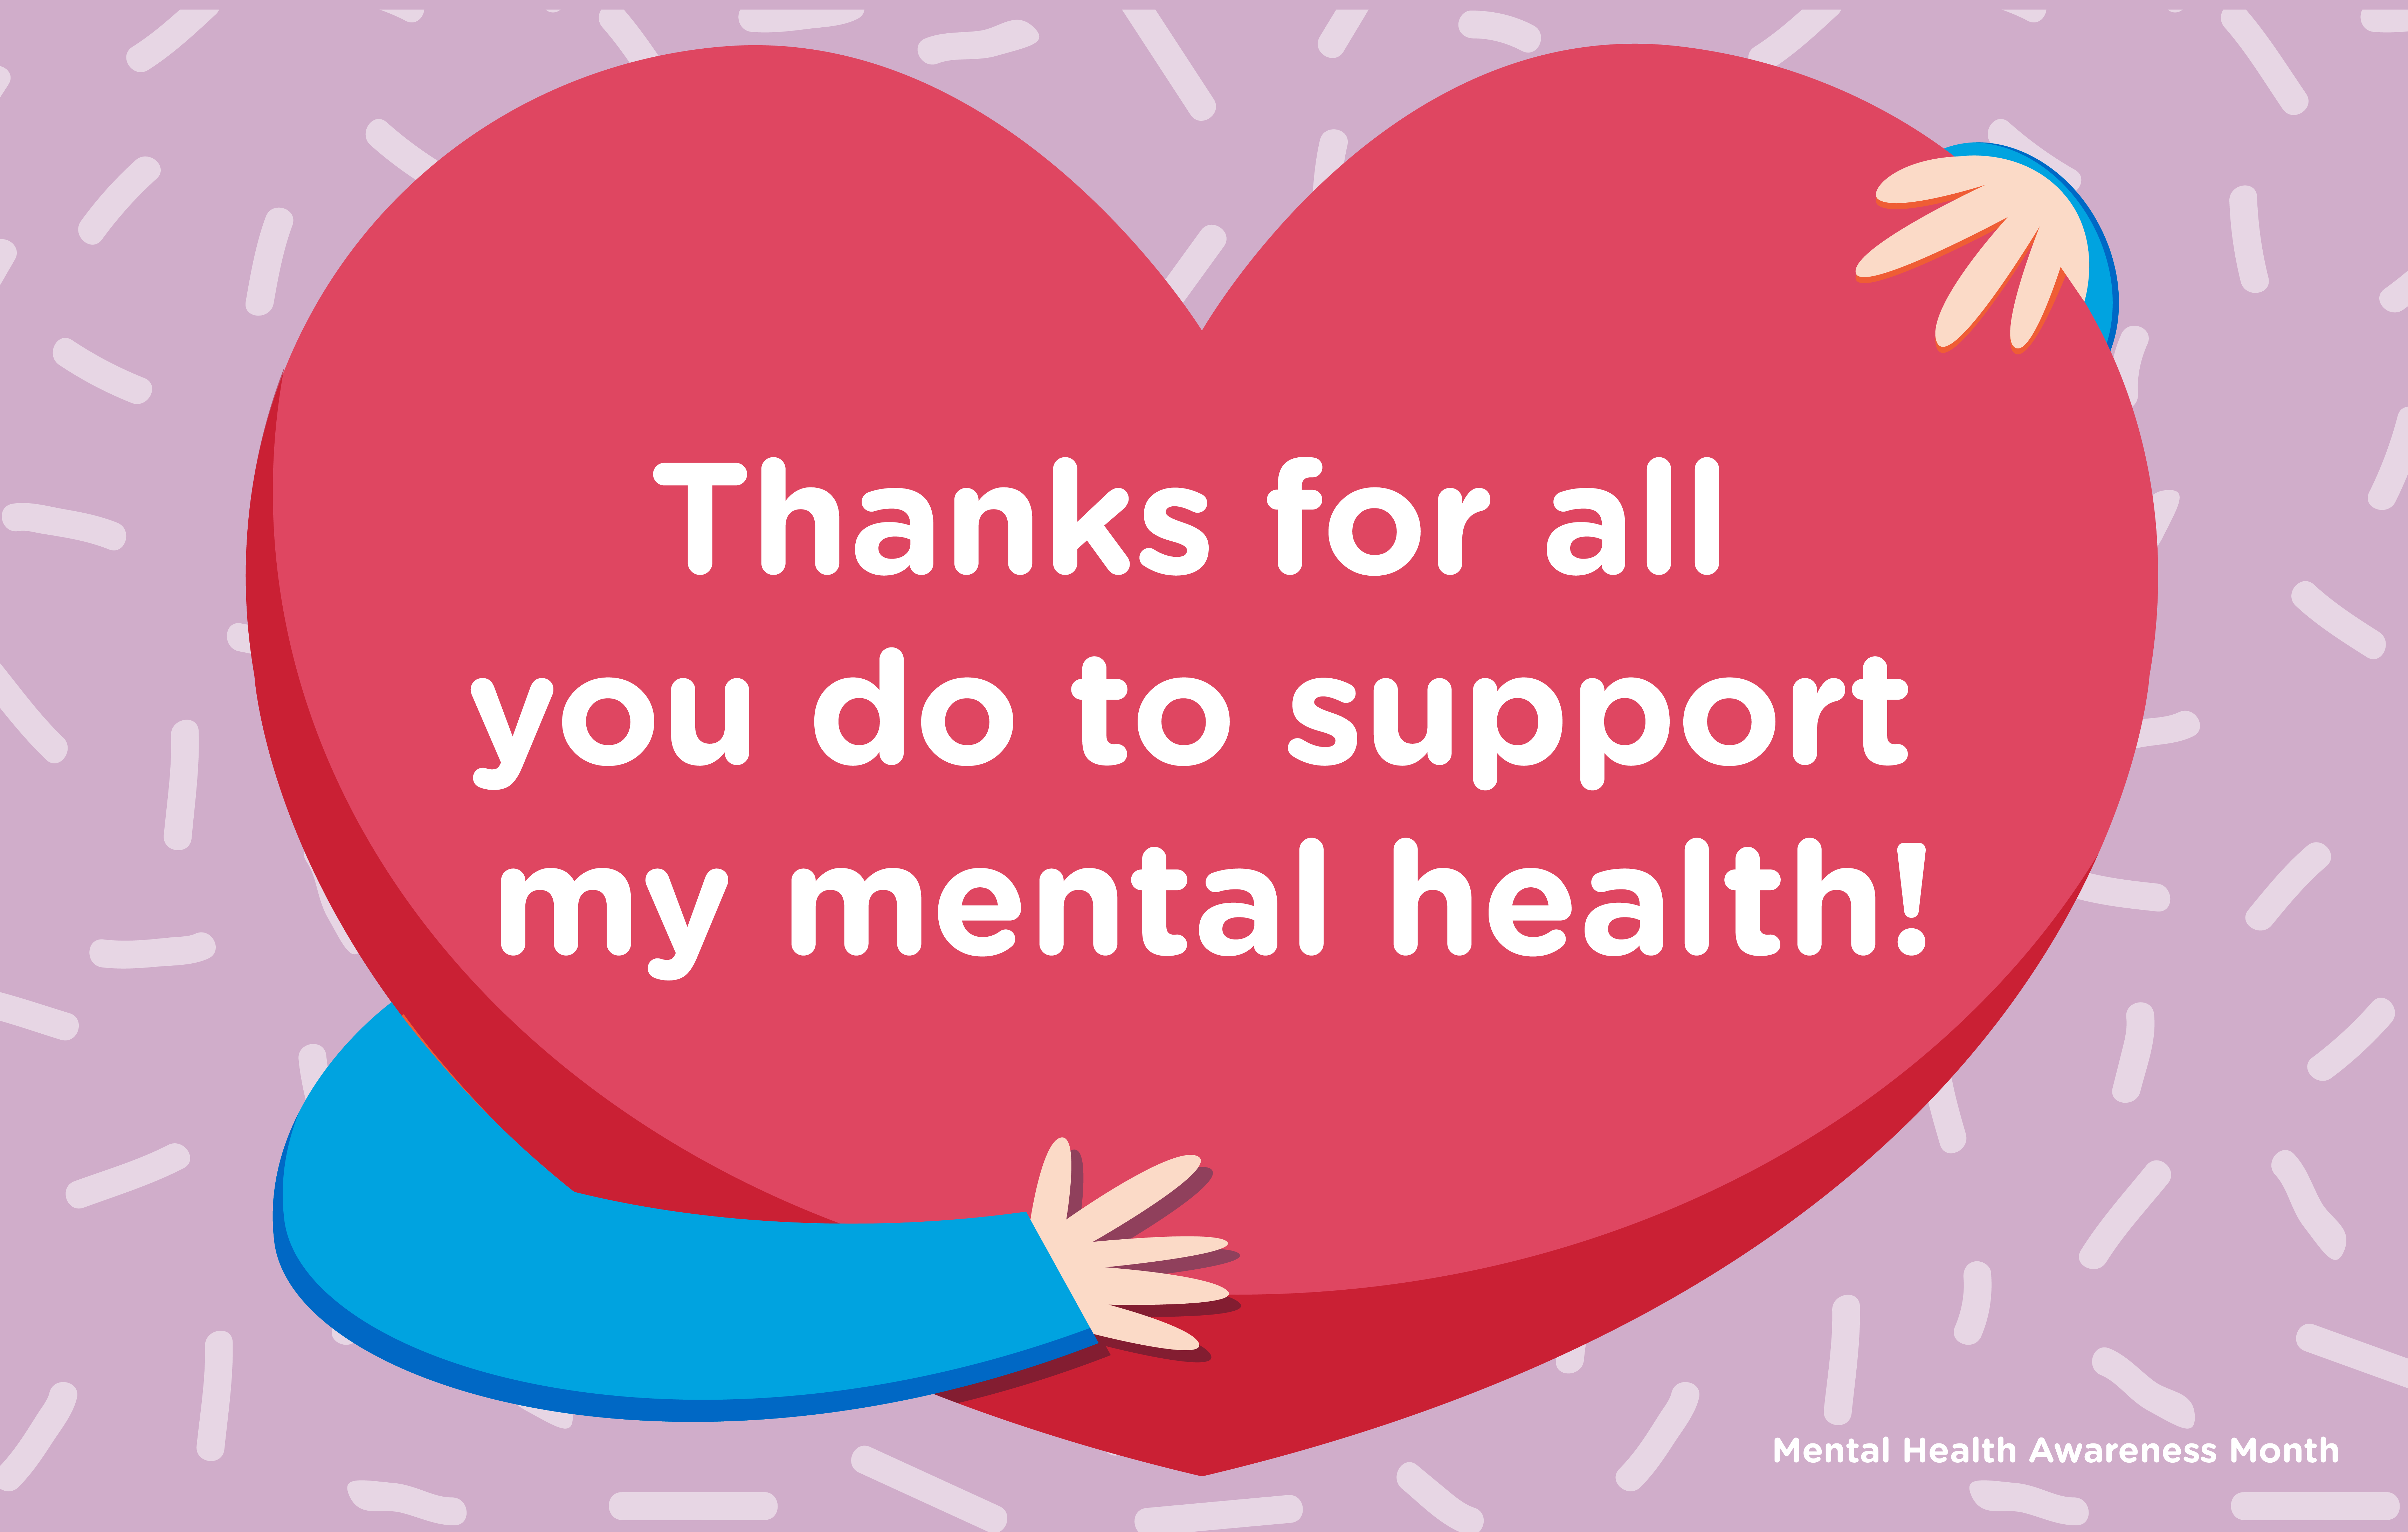 Mental Health Awareness Month: Thanks for all you do to support my mental health!